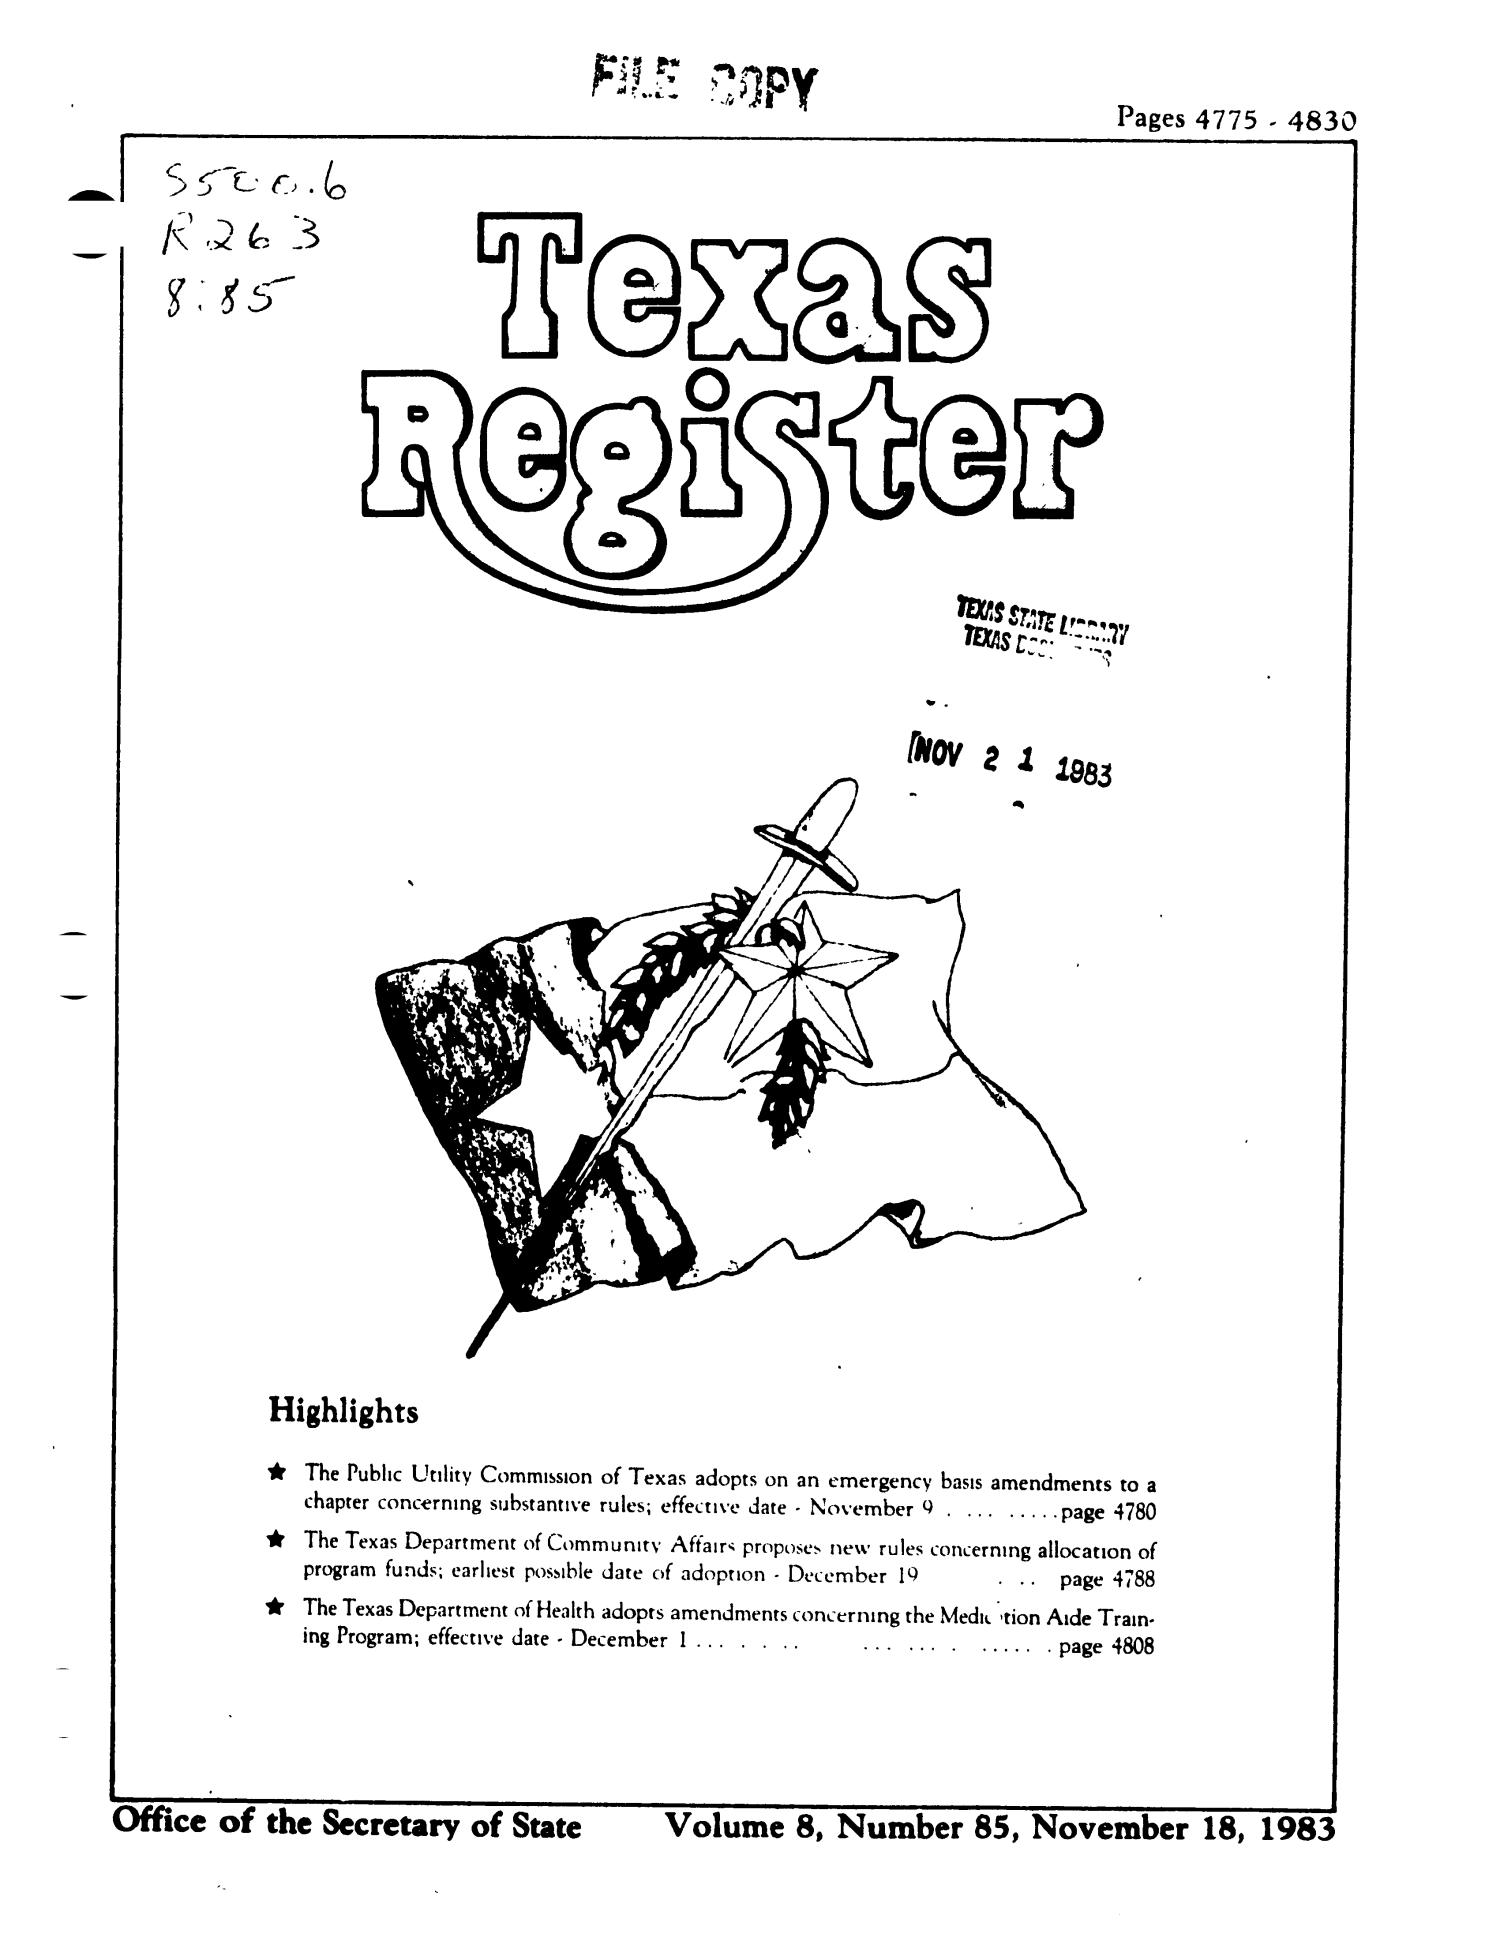 Texas Register, Volume 8, Number 85, Pages 4775-4830, November 18, 1983
                                                
                                                    Title Page
                                                